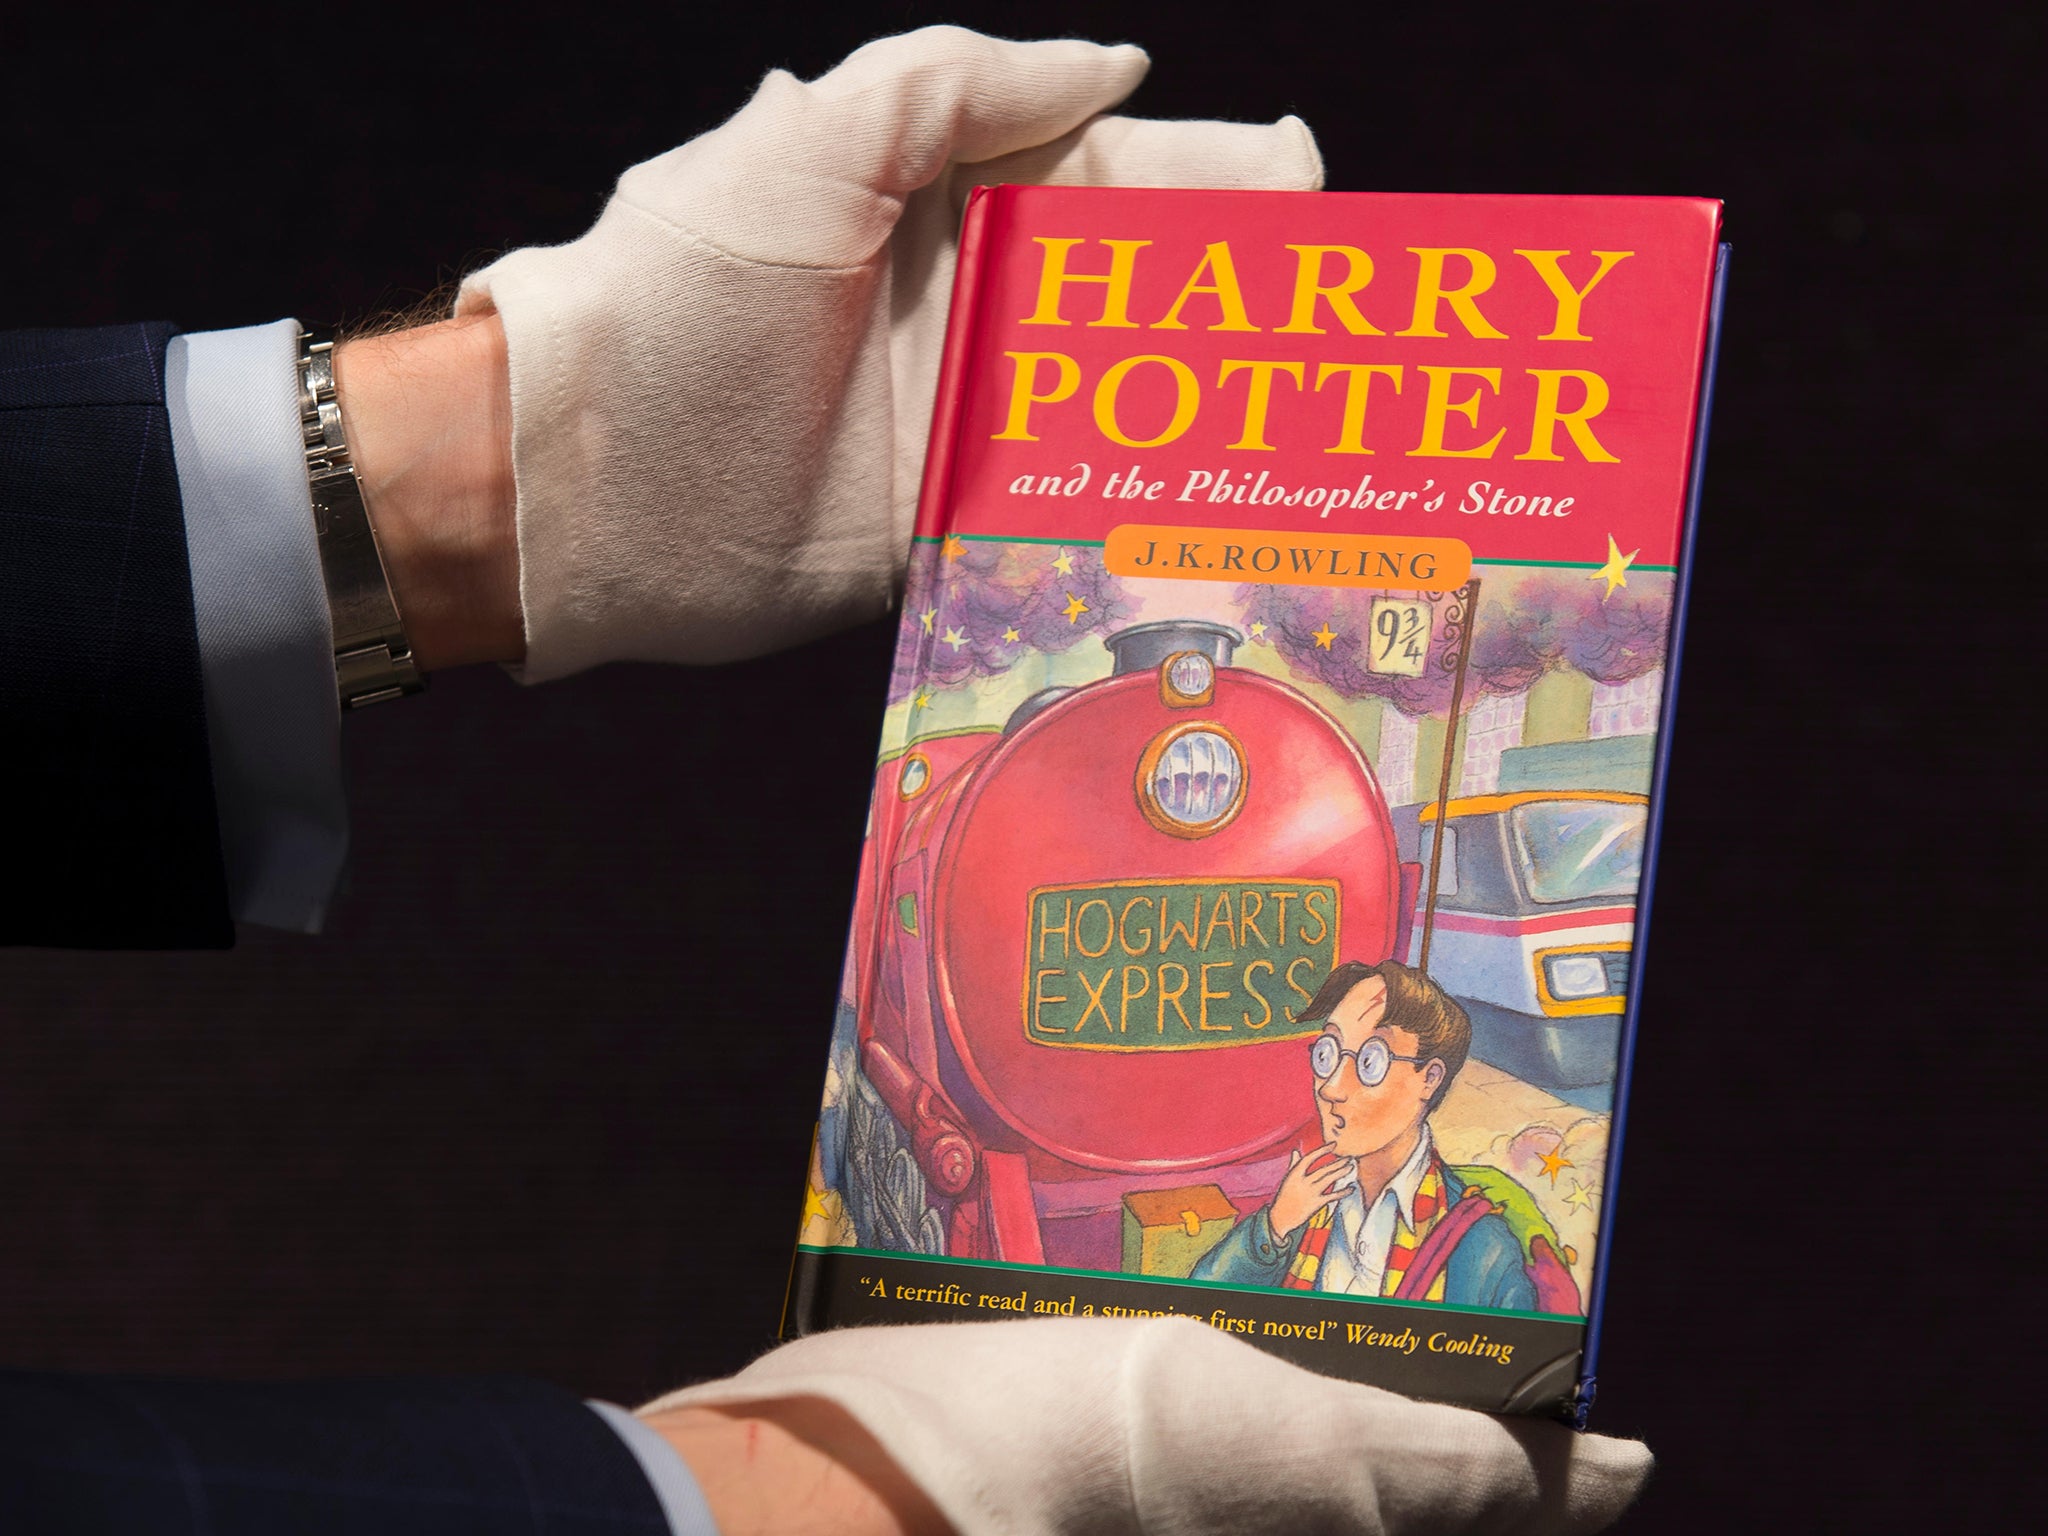 A signed copy of ‘Harry Potter and the Philosopher’s Stone’ recently sold for £80,000